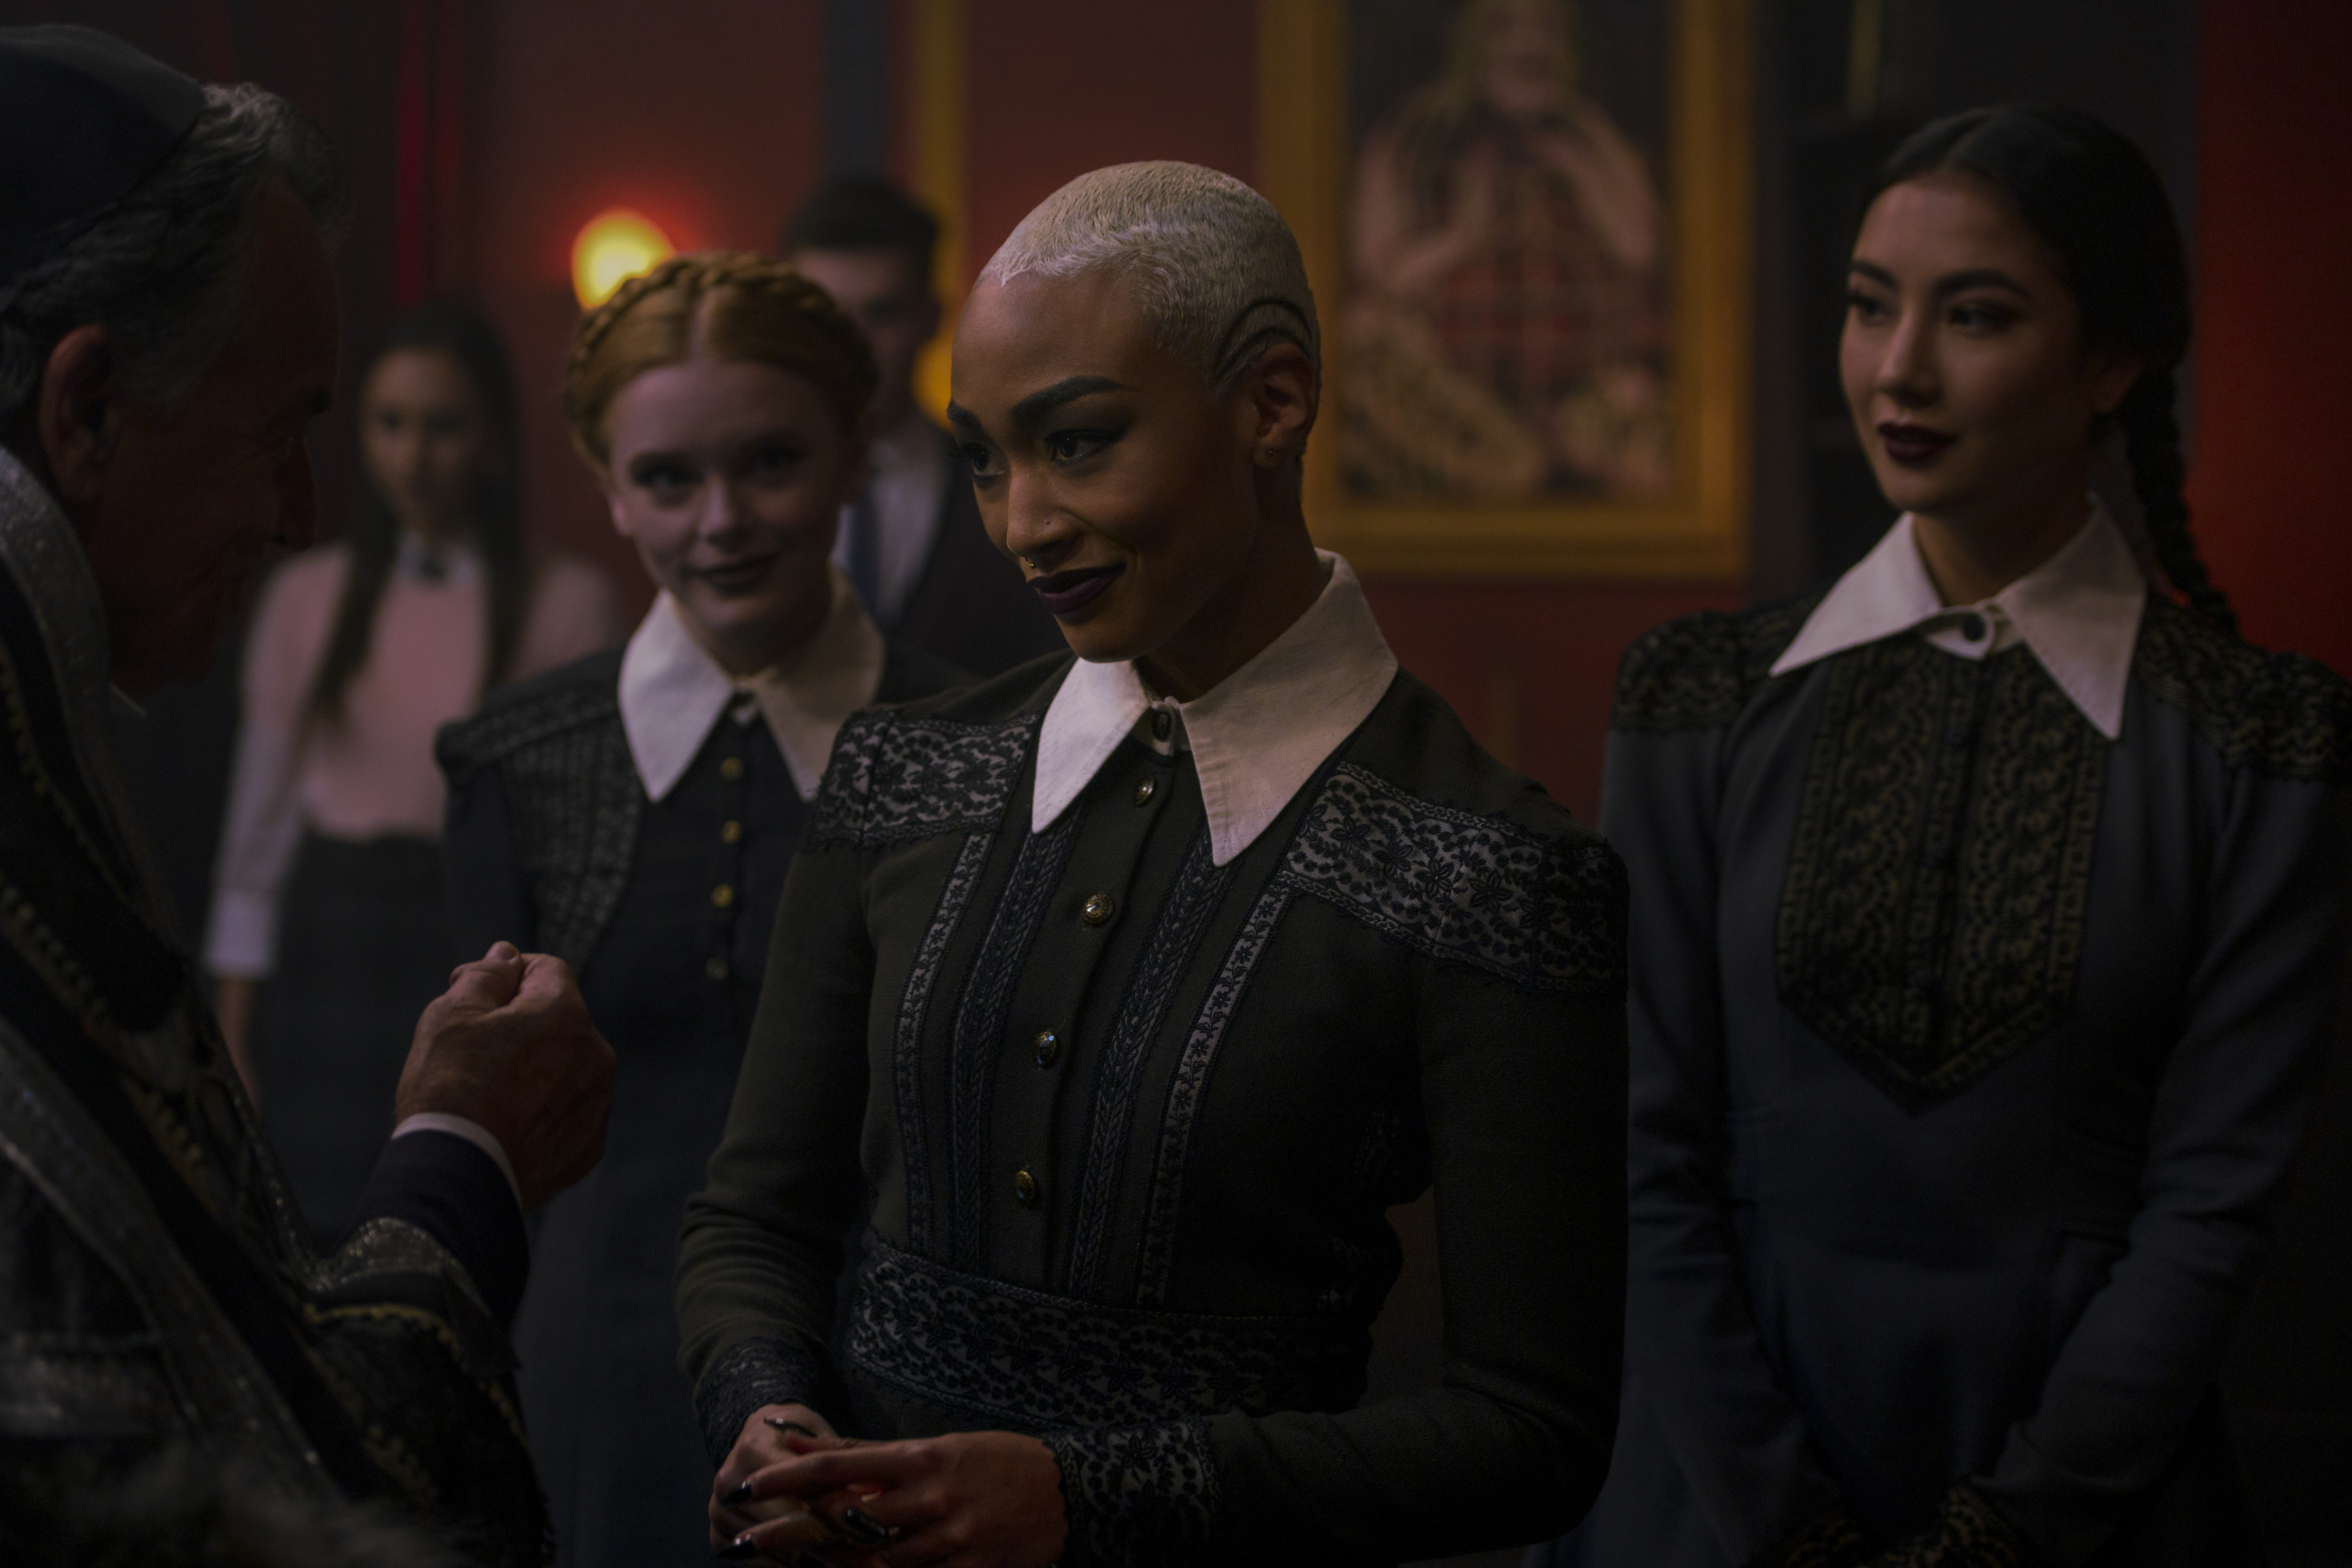 tv show, chilling adventures of sabrina, abigail cowen, adeline rudolph, agatha (chilling adventures of sabrina), dorcas (chilling adventures of sabrina), prudence (chilling adventures of sabrina), tati gabrielle